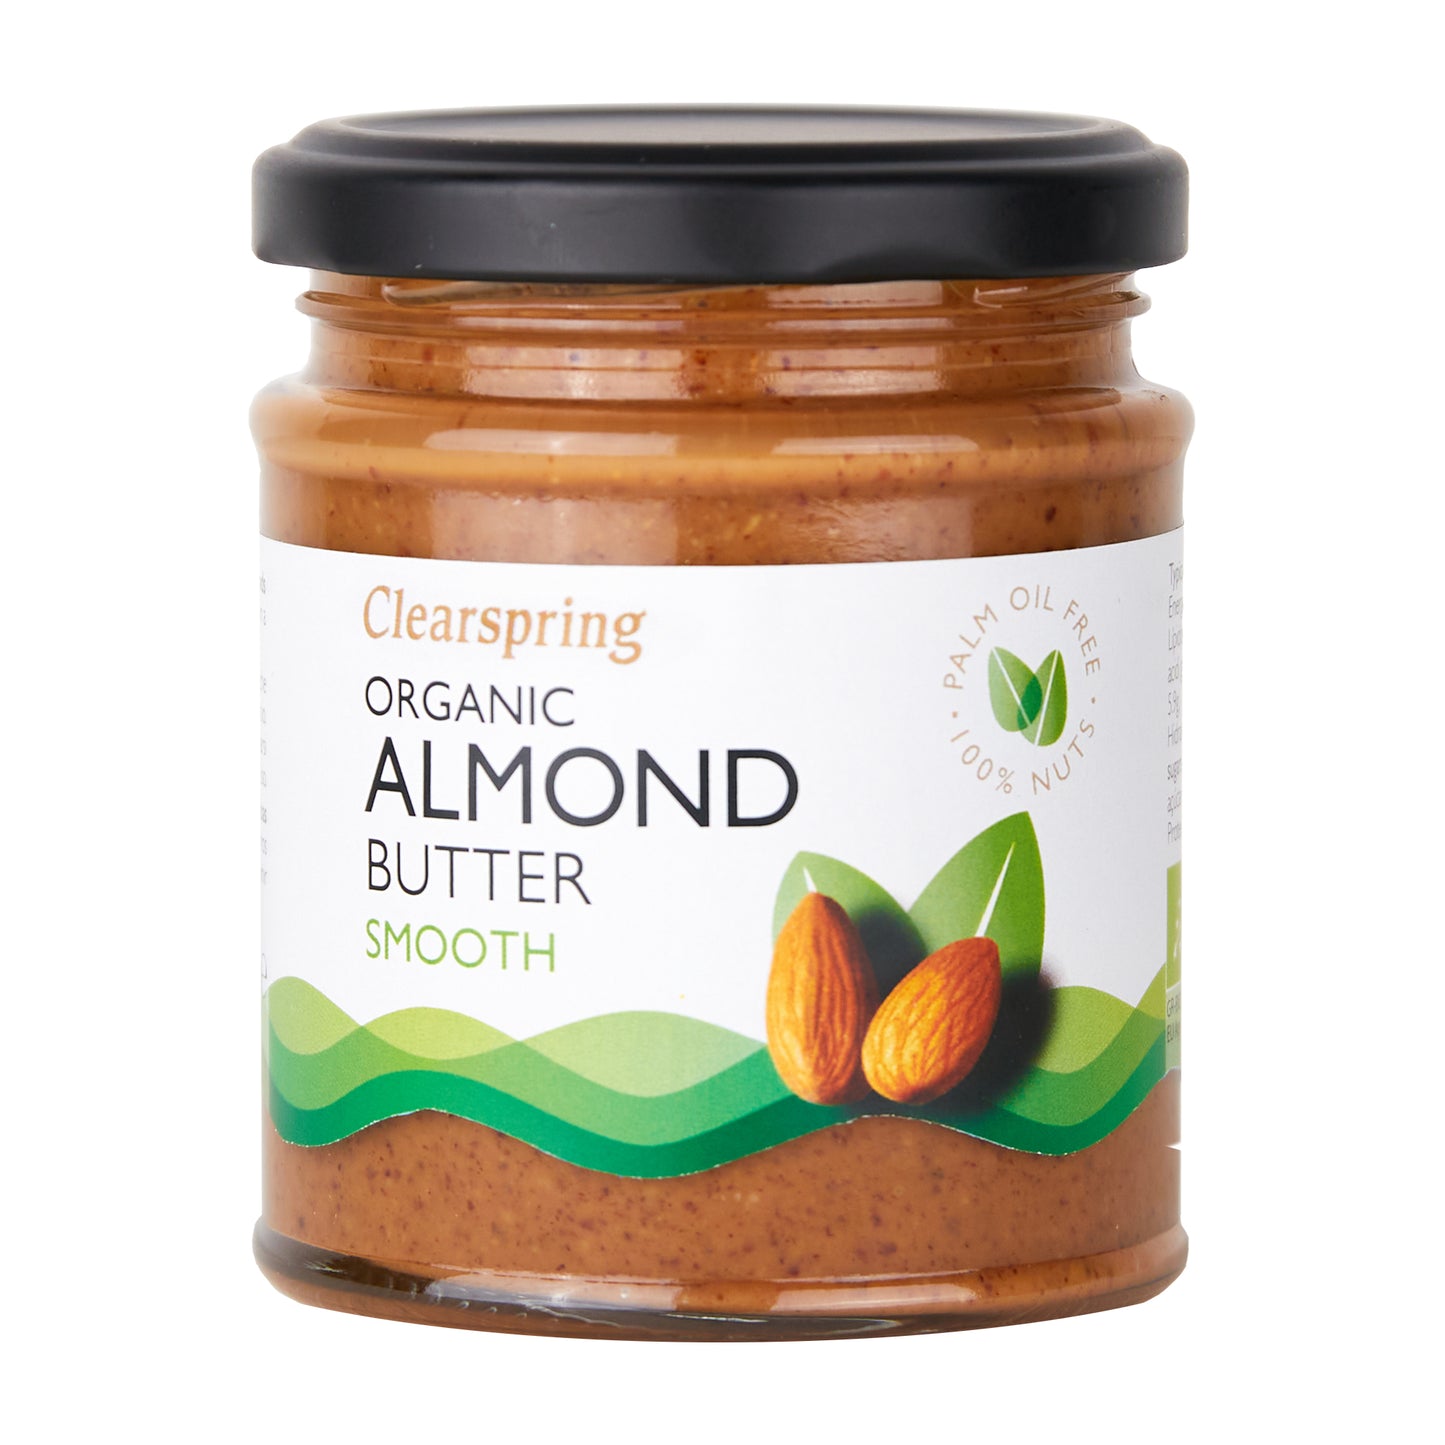 Organic Almond Butter - Smooth